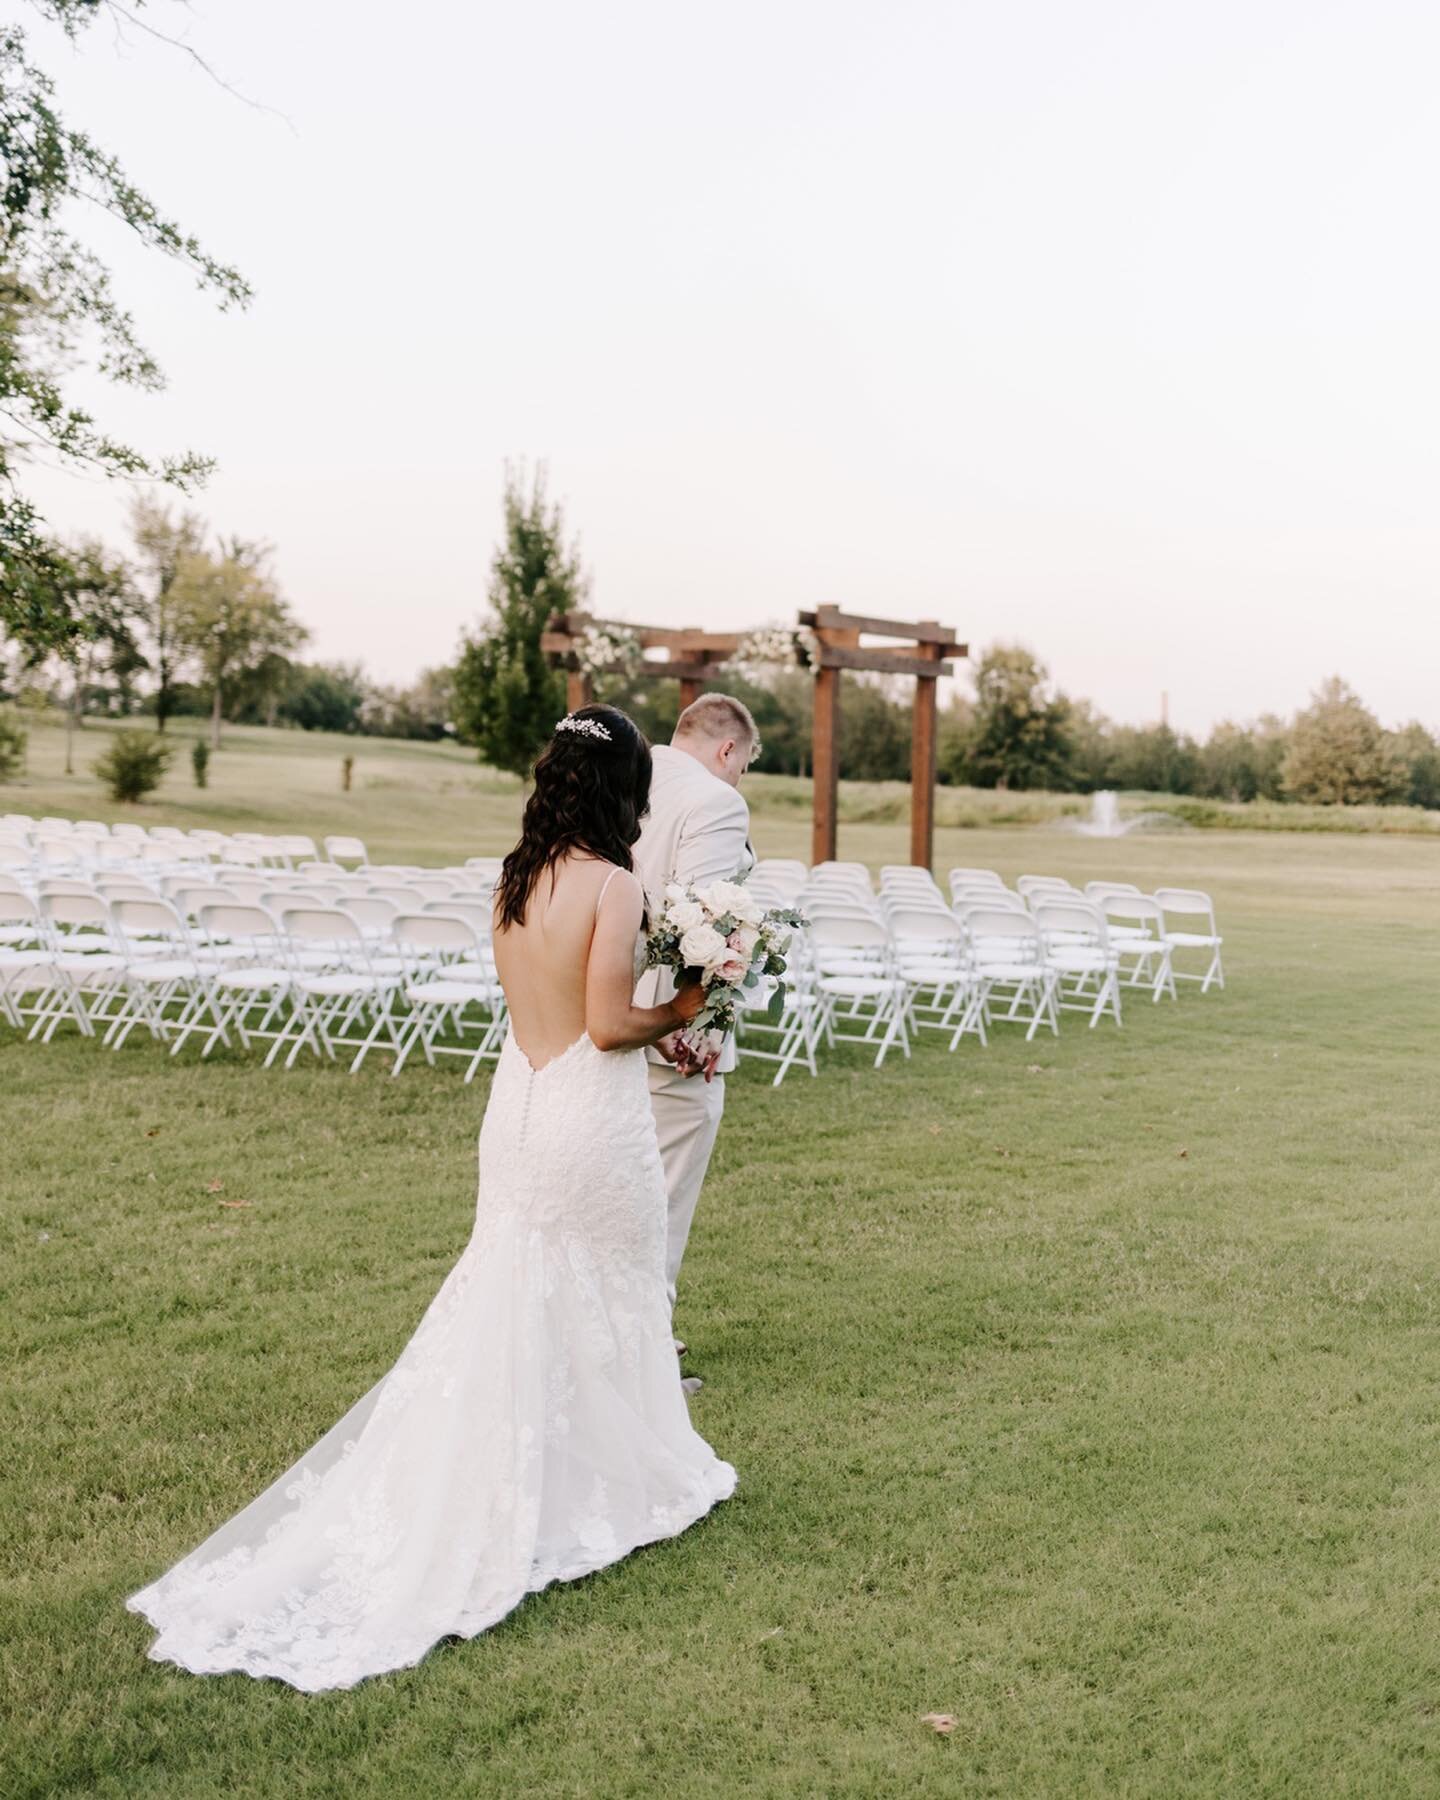 This gallery went out yesterday so, I can&rsquo;t help but share a few. This day felt like one of the hottest days all year, but man @tay_schofield made one beautiful summer bride. 

Venue: @810ranchandcattleco 
Florals: @robynsflowergarden